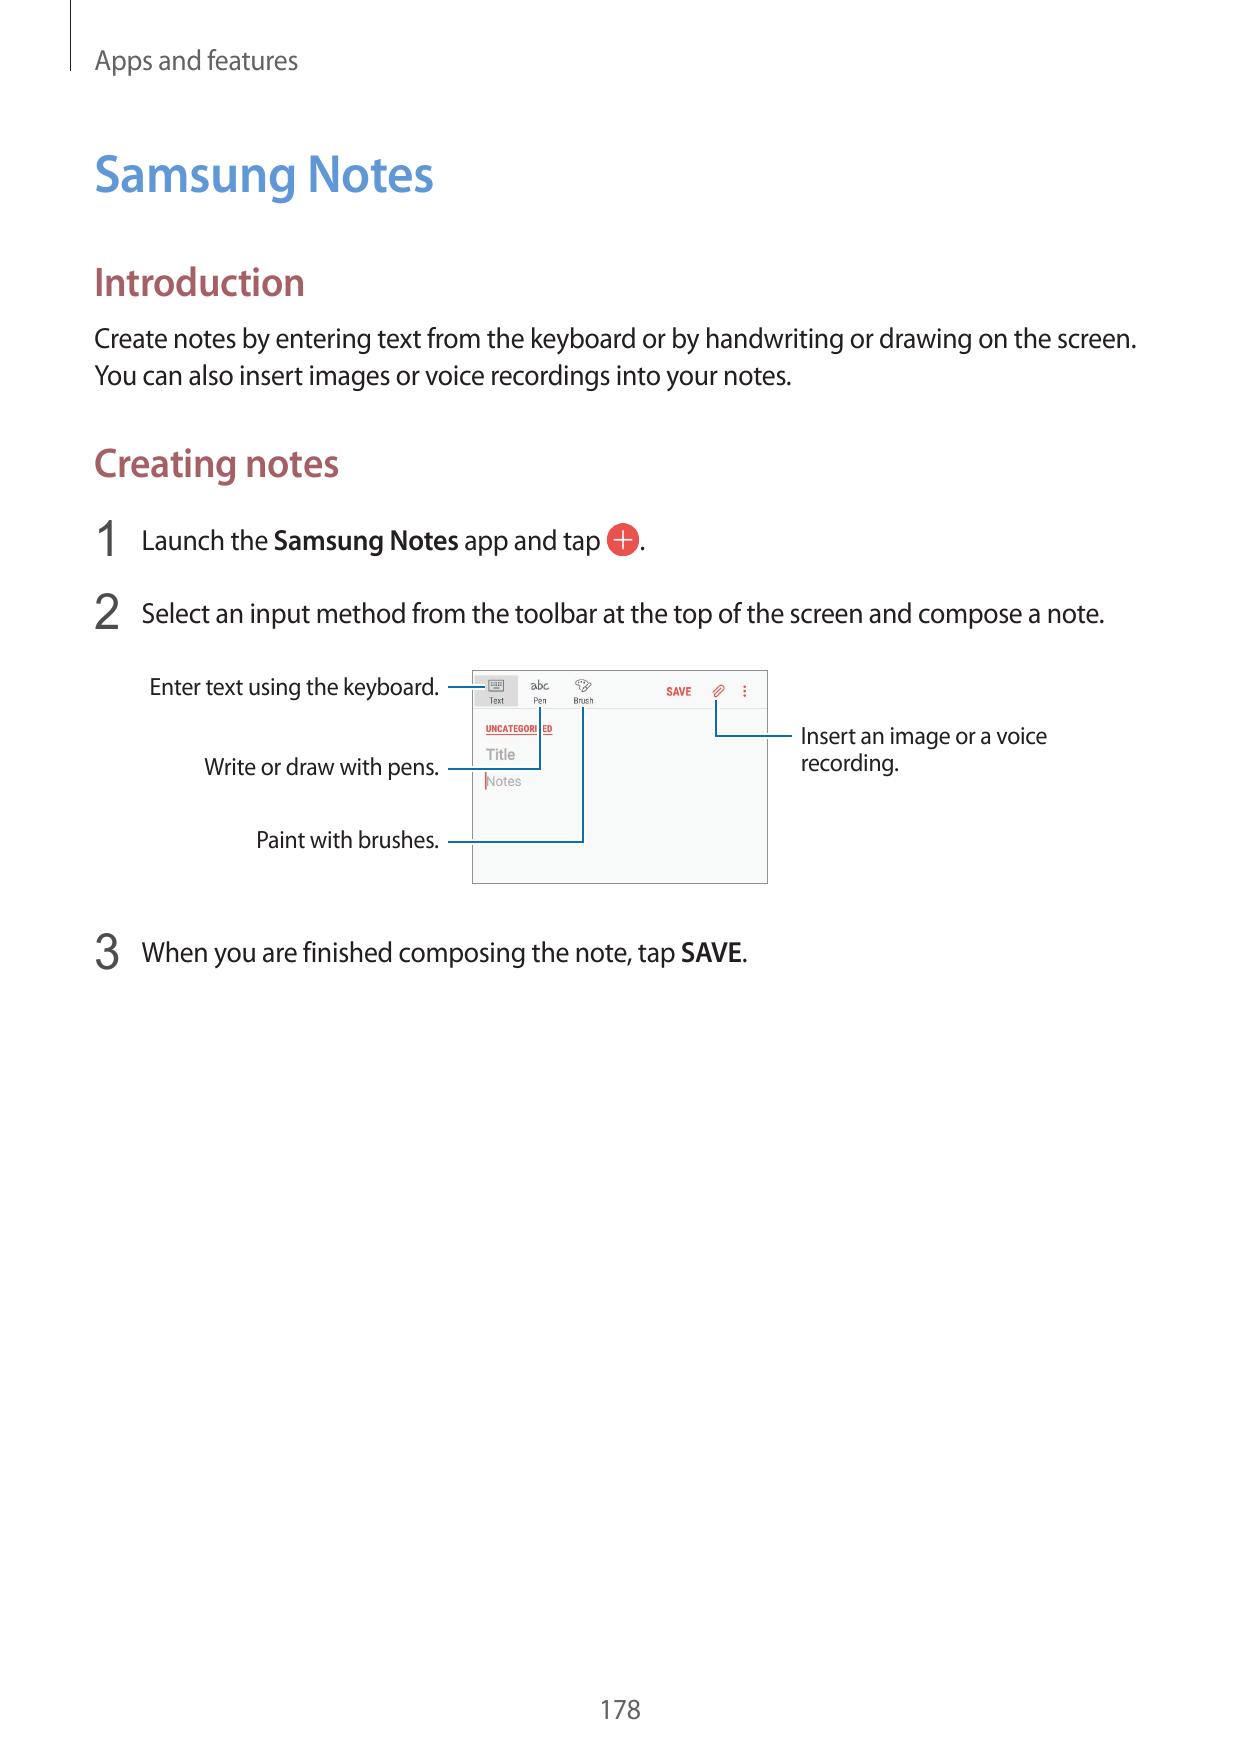 Apps and featuresSamsung NotesIntroductionCreate notes by entering text from the keyboard or by handwriting or drawing on the sc